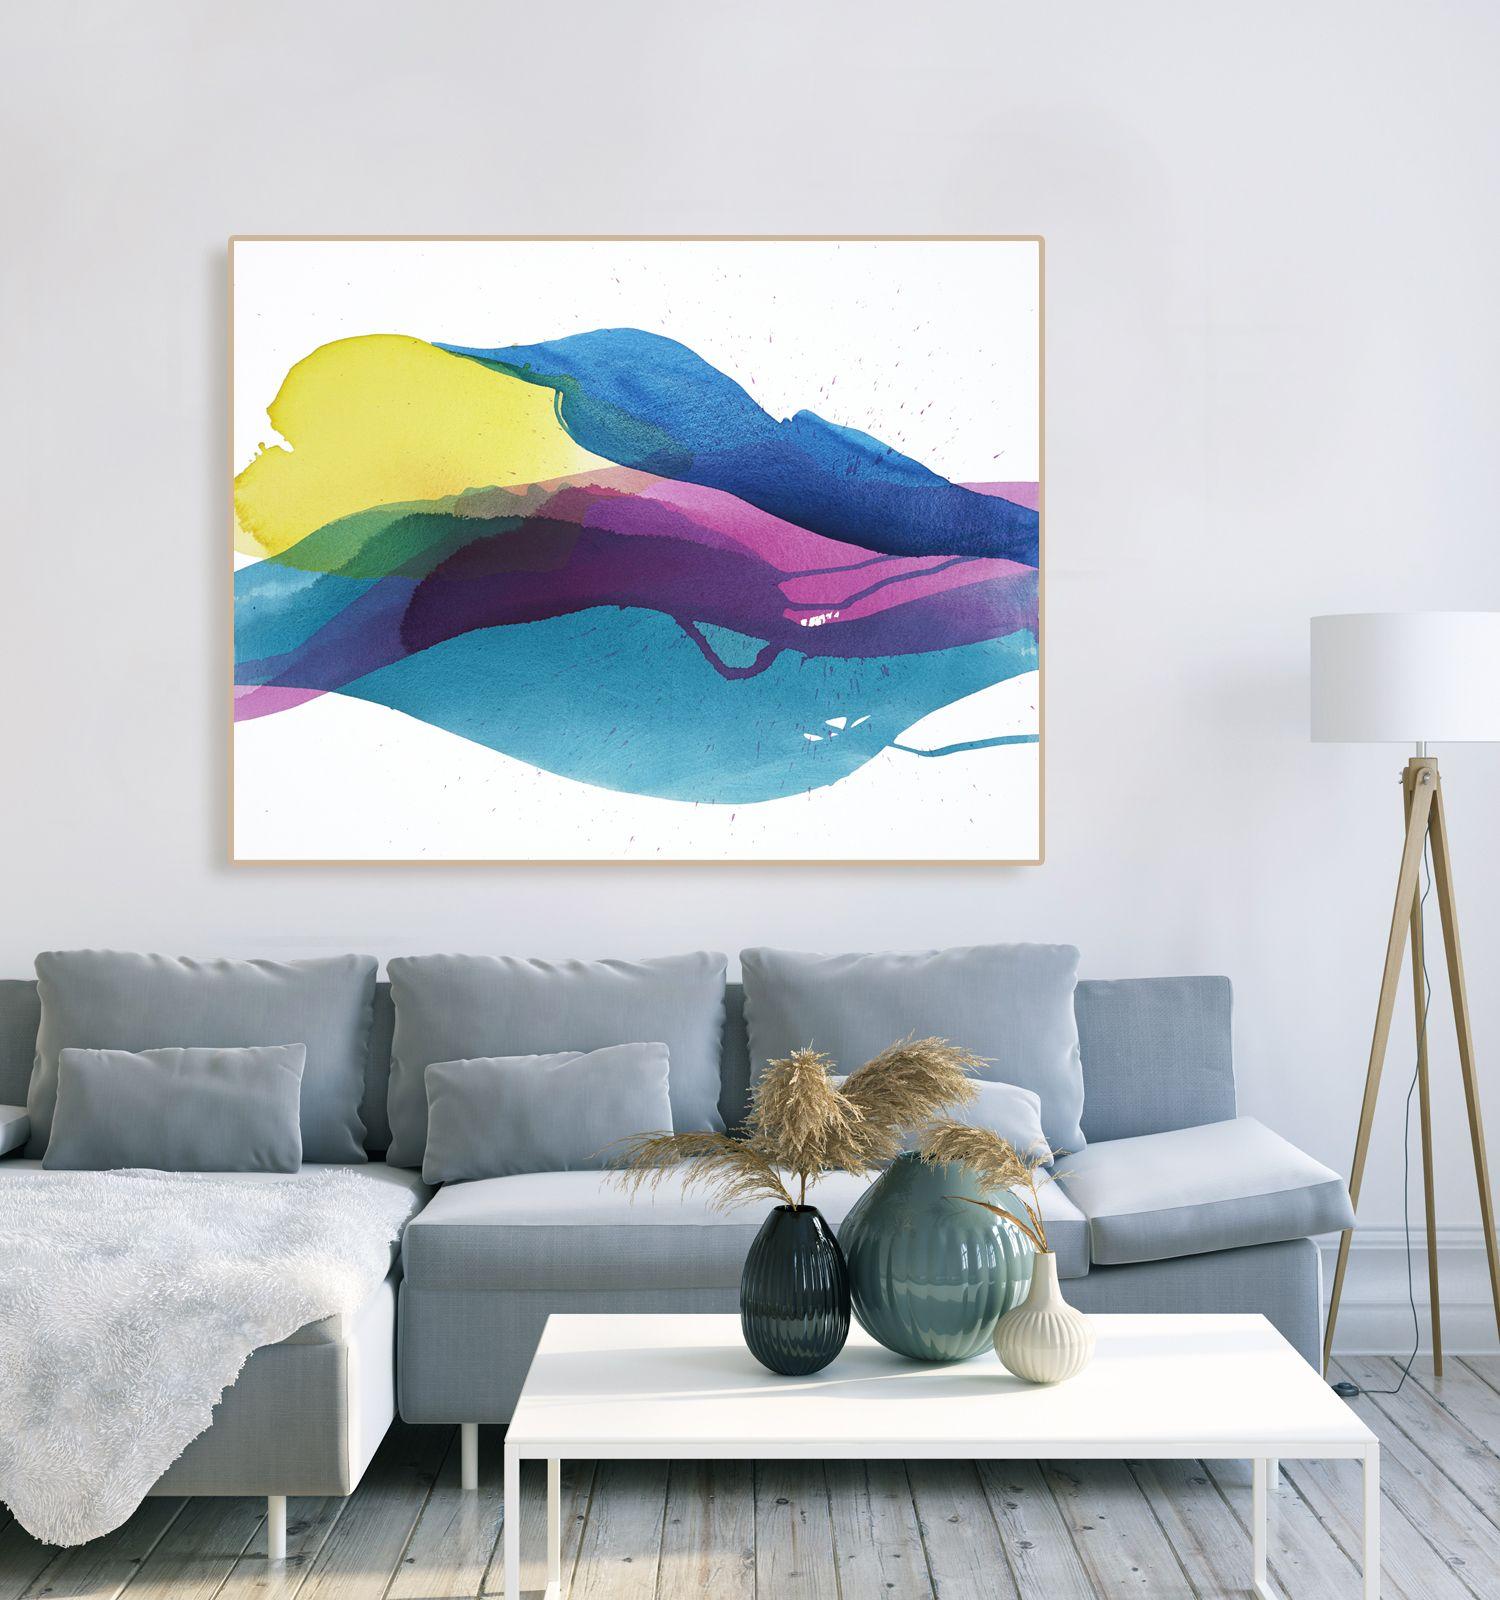 A vibrant, colorful abstract painting inspired by dazzling summer sunsets, featuring delicate veils of paint.    -- INCLUDES --    *One original painting, unframed    *Signed on the back       -- DETAILS --    *Acrylic on canvas    *Measures 55